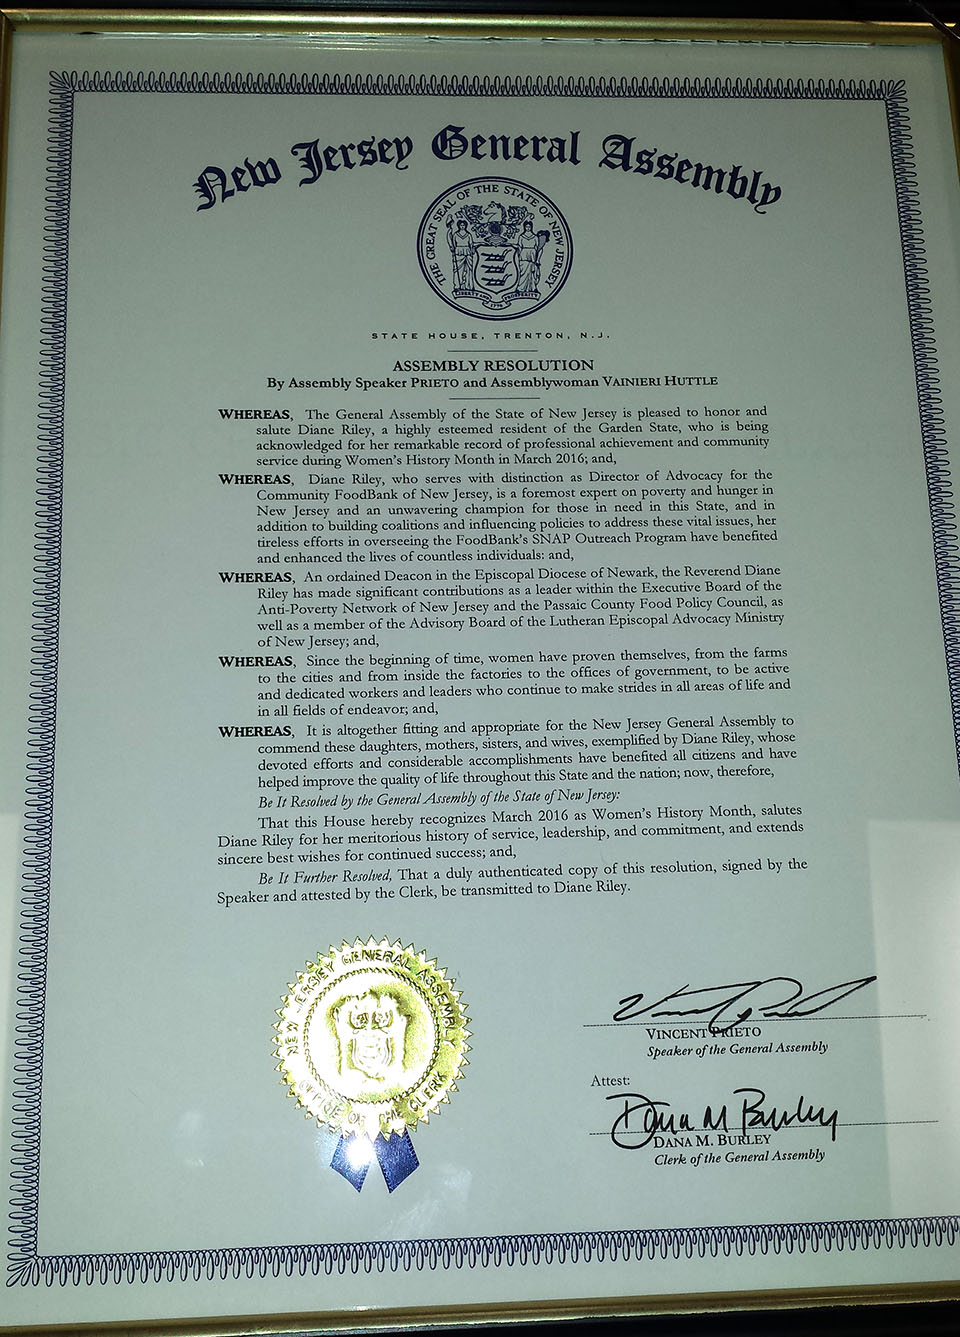 NJ Assembly resolution honoring Diane Riley.